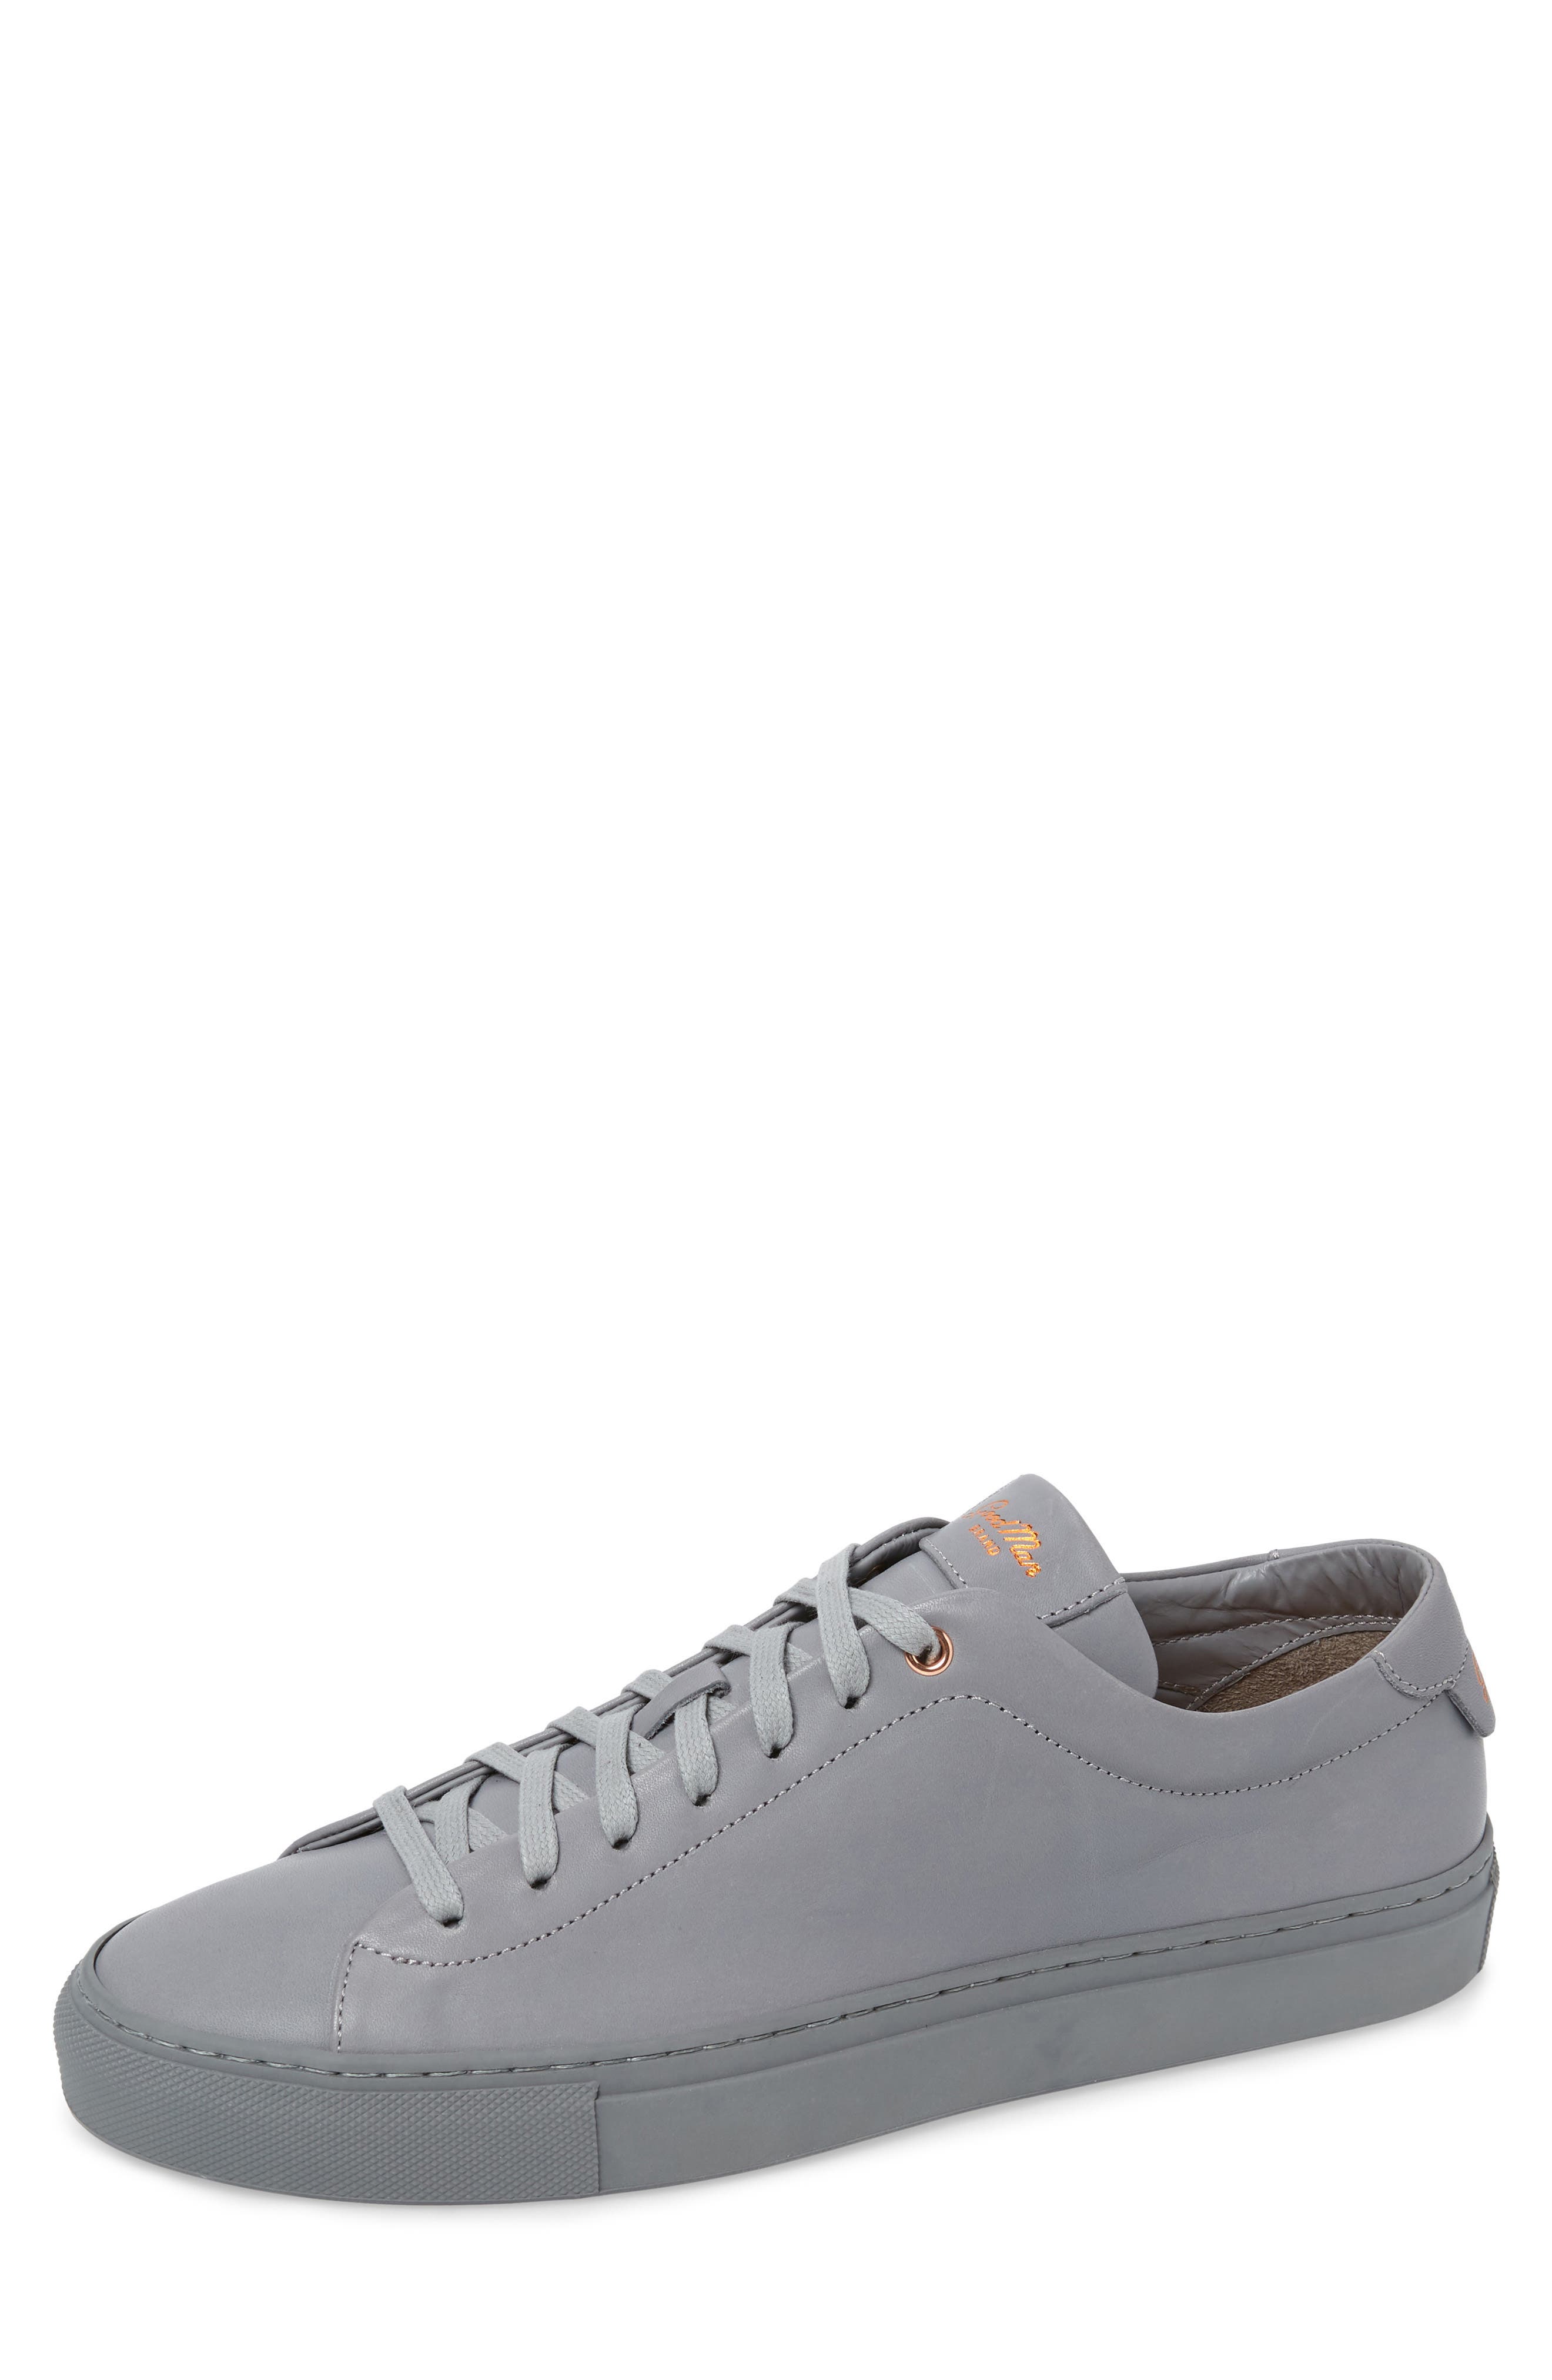 mens grey leather sneakers